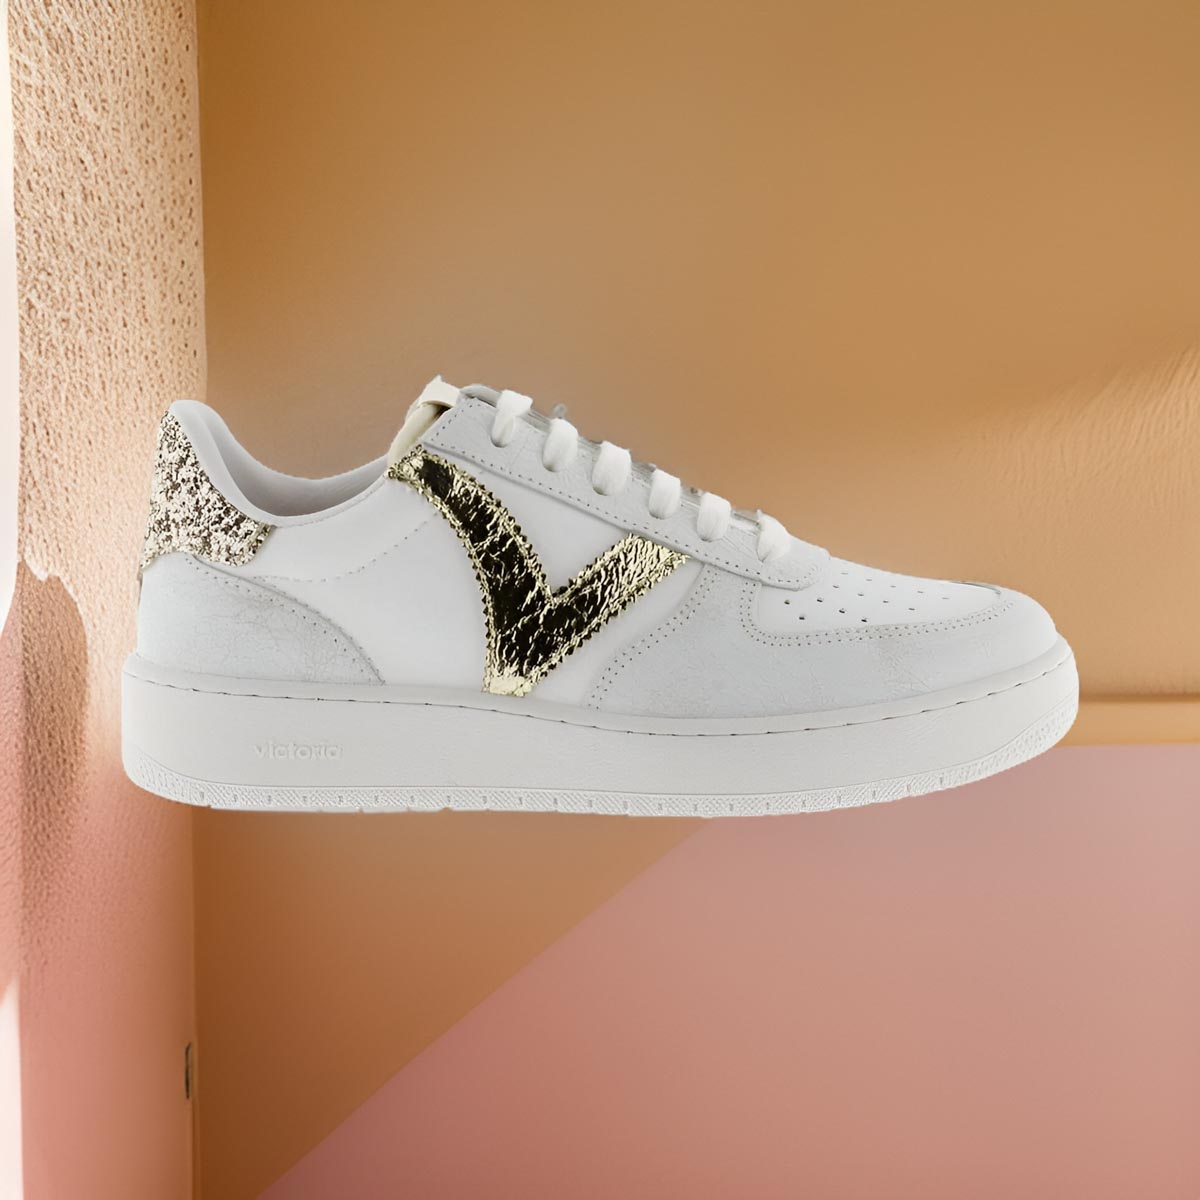 Victoria Madrid Crackle & Metal White Lace-Up Runners with Gold Accents